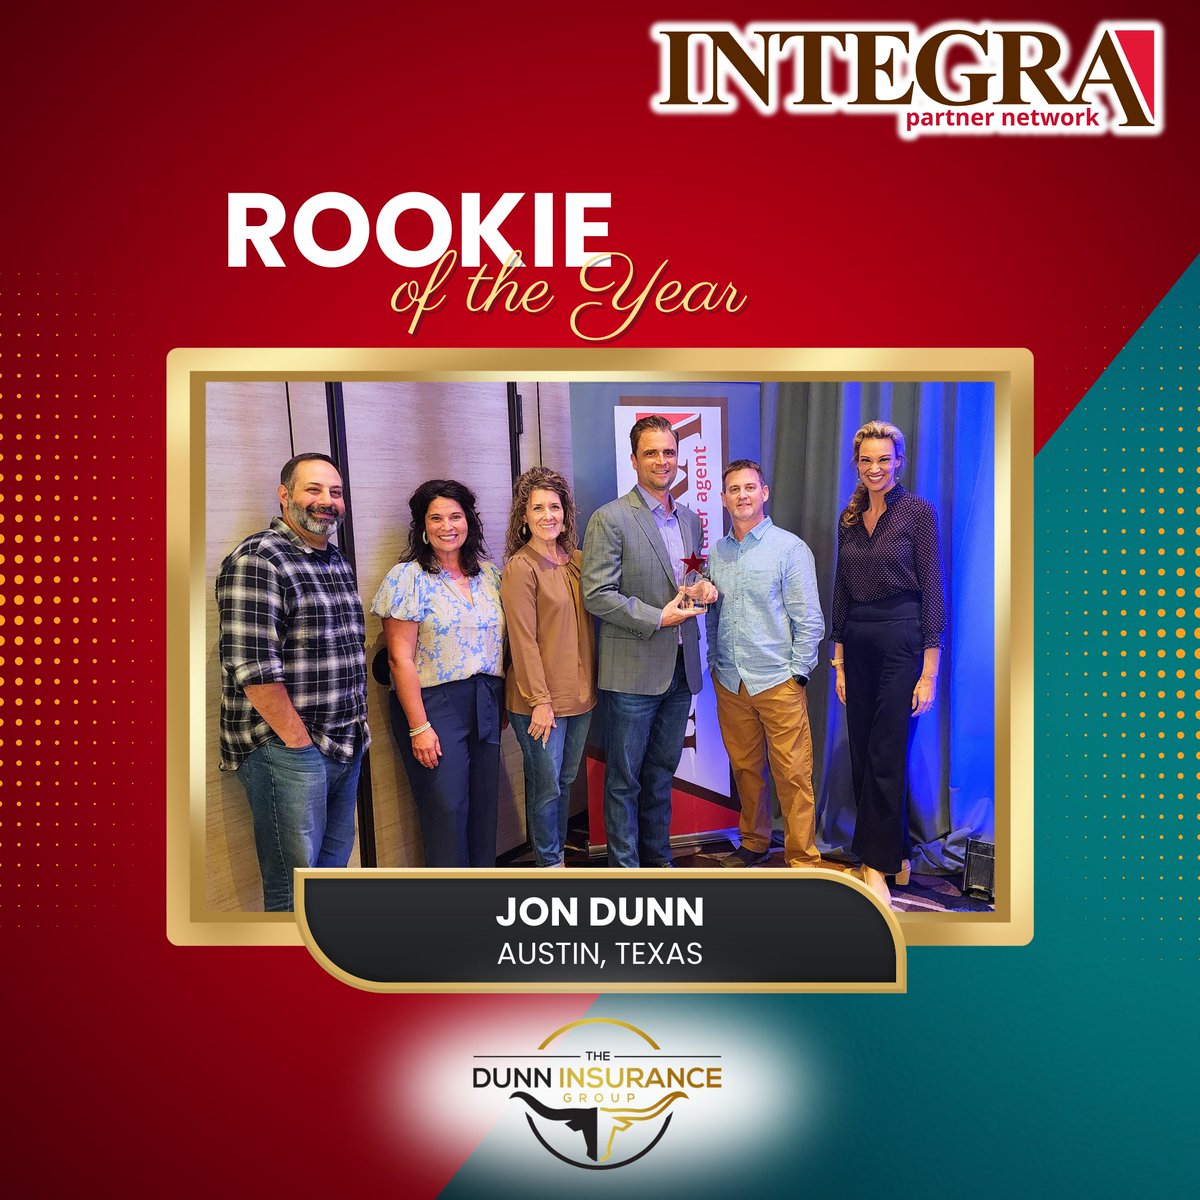 Congratulations to our Integra Partner Network 'Rookie of the Year,' Jon Dunn, owner of The Dunn Insurance Group in Austin, Texas. 

Find your way to Integra!

#integra #agencygroup #independentagent #independentagency # #insurance #insuranceagent #insuranceagency #findyourway